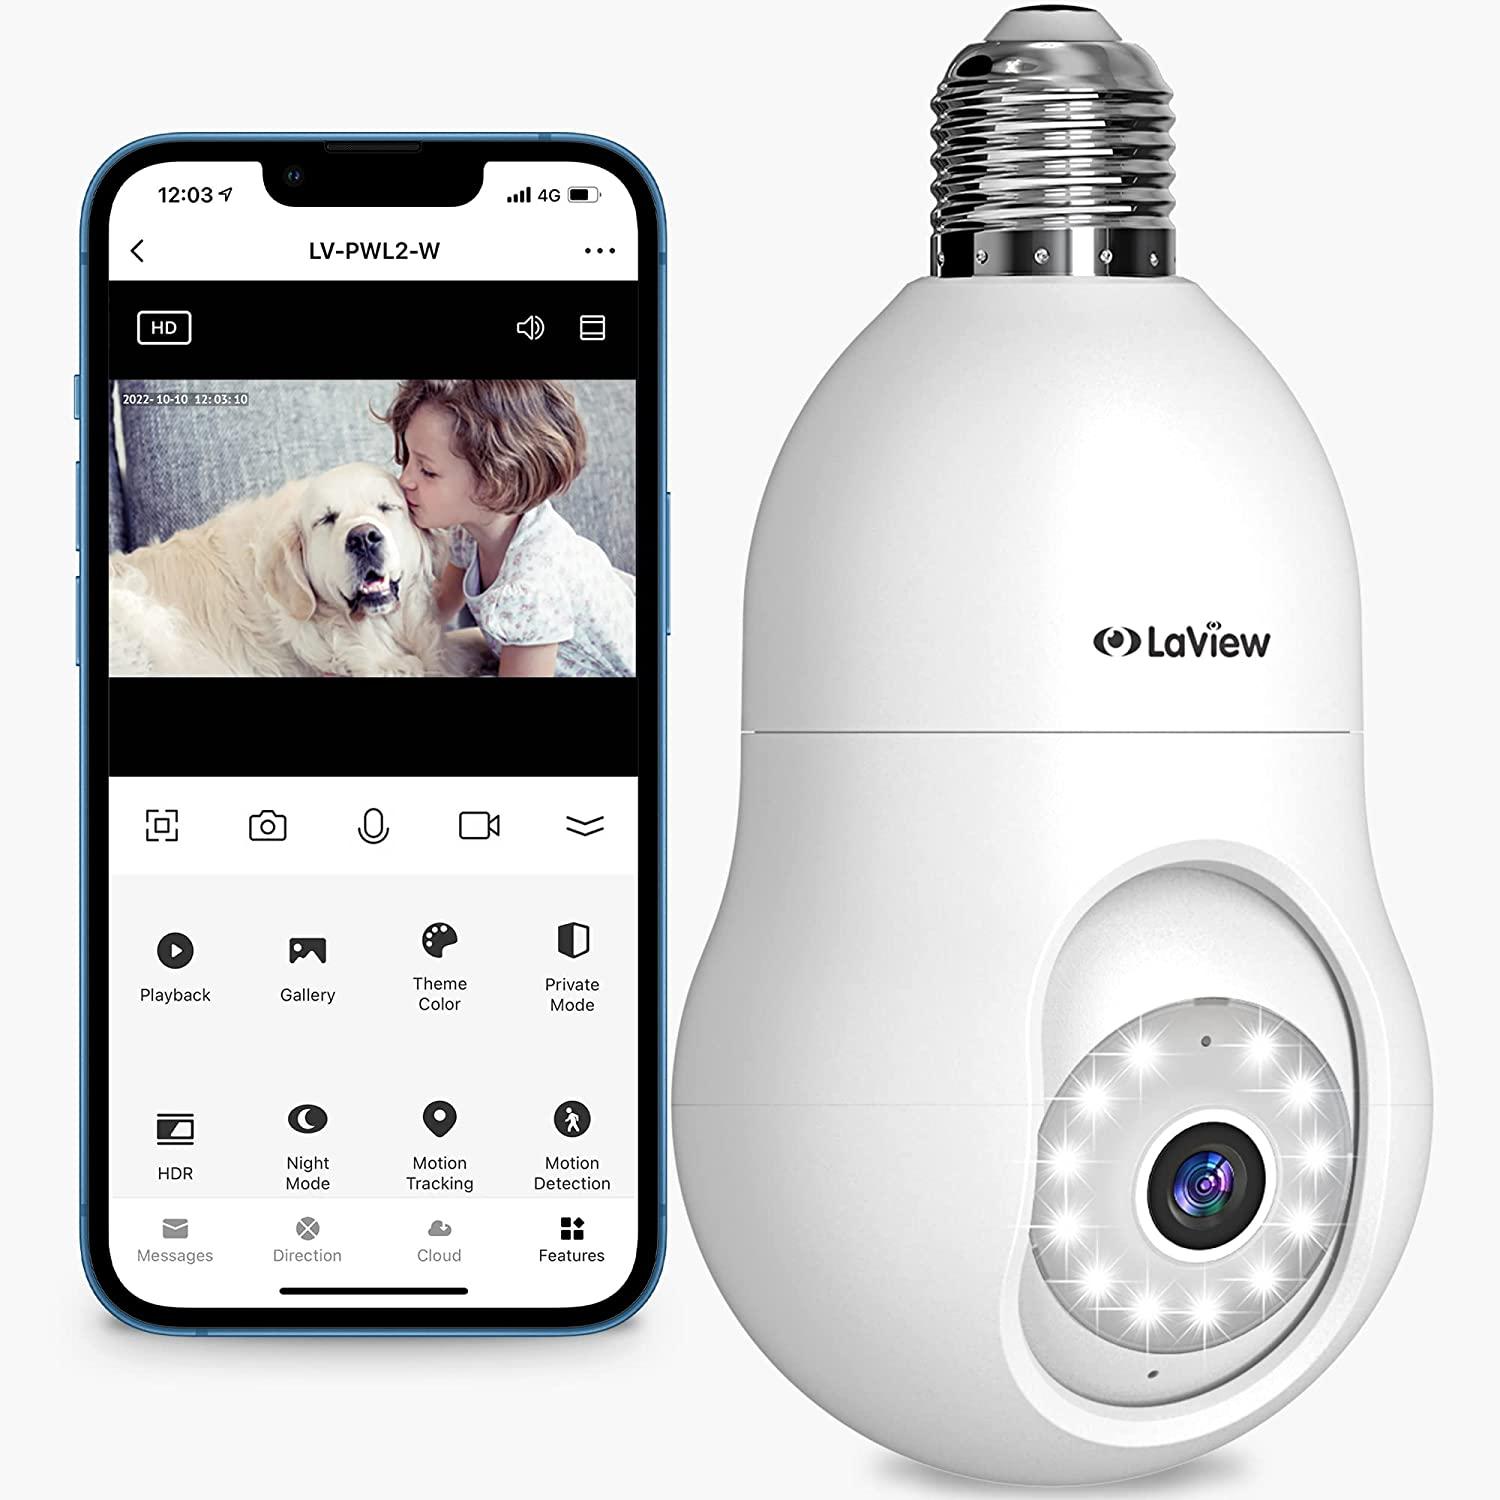 LaView 4MP Wireless Smart Bulb Security Camera for $19.99 Shipped